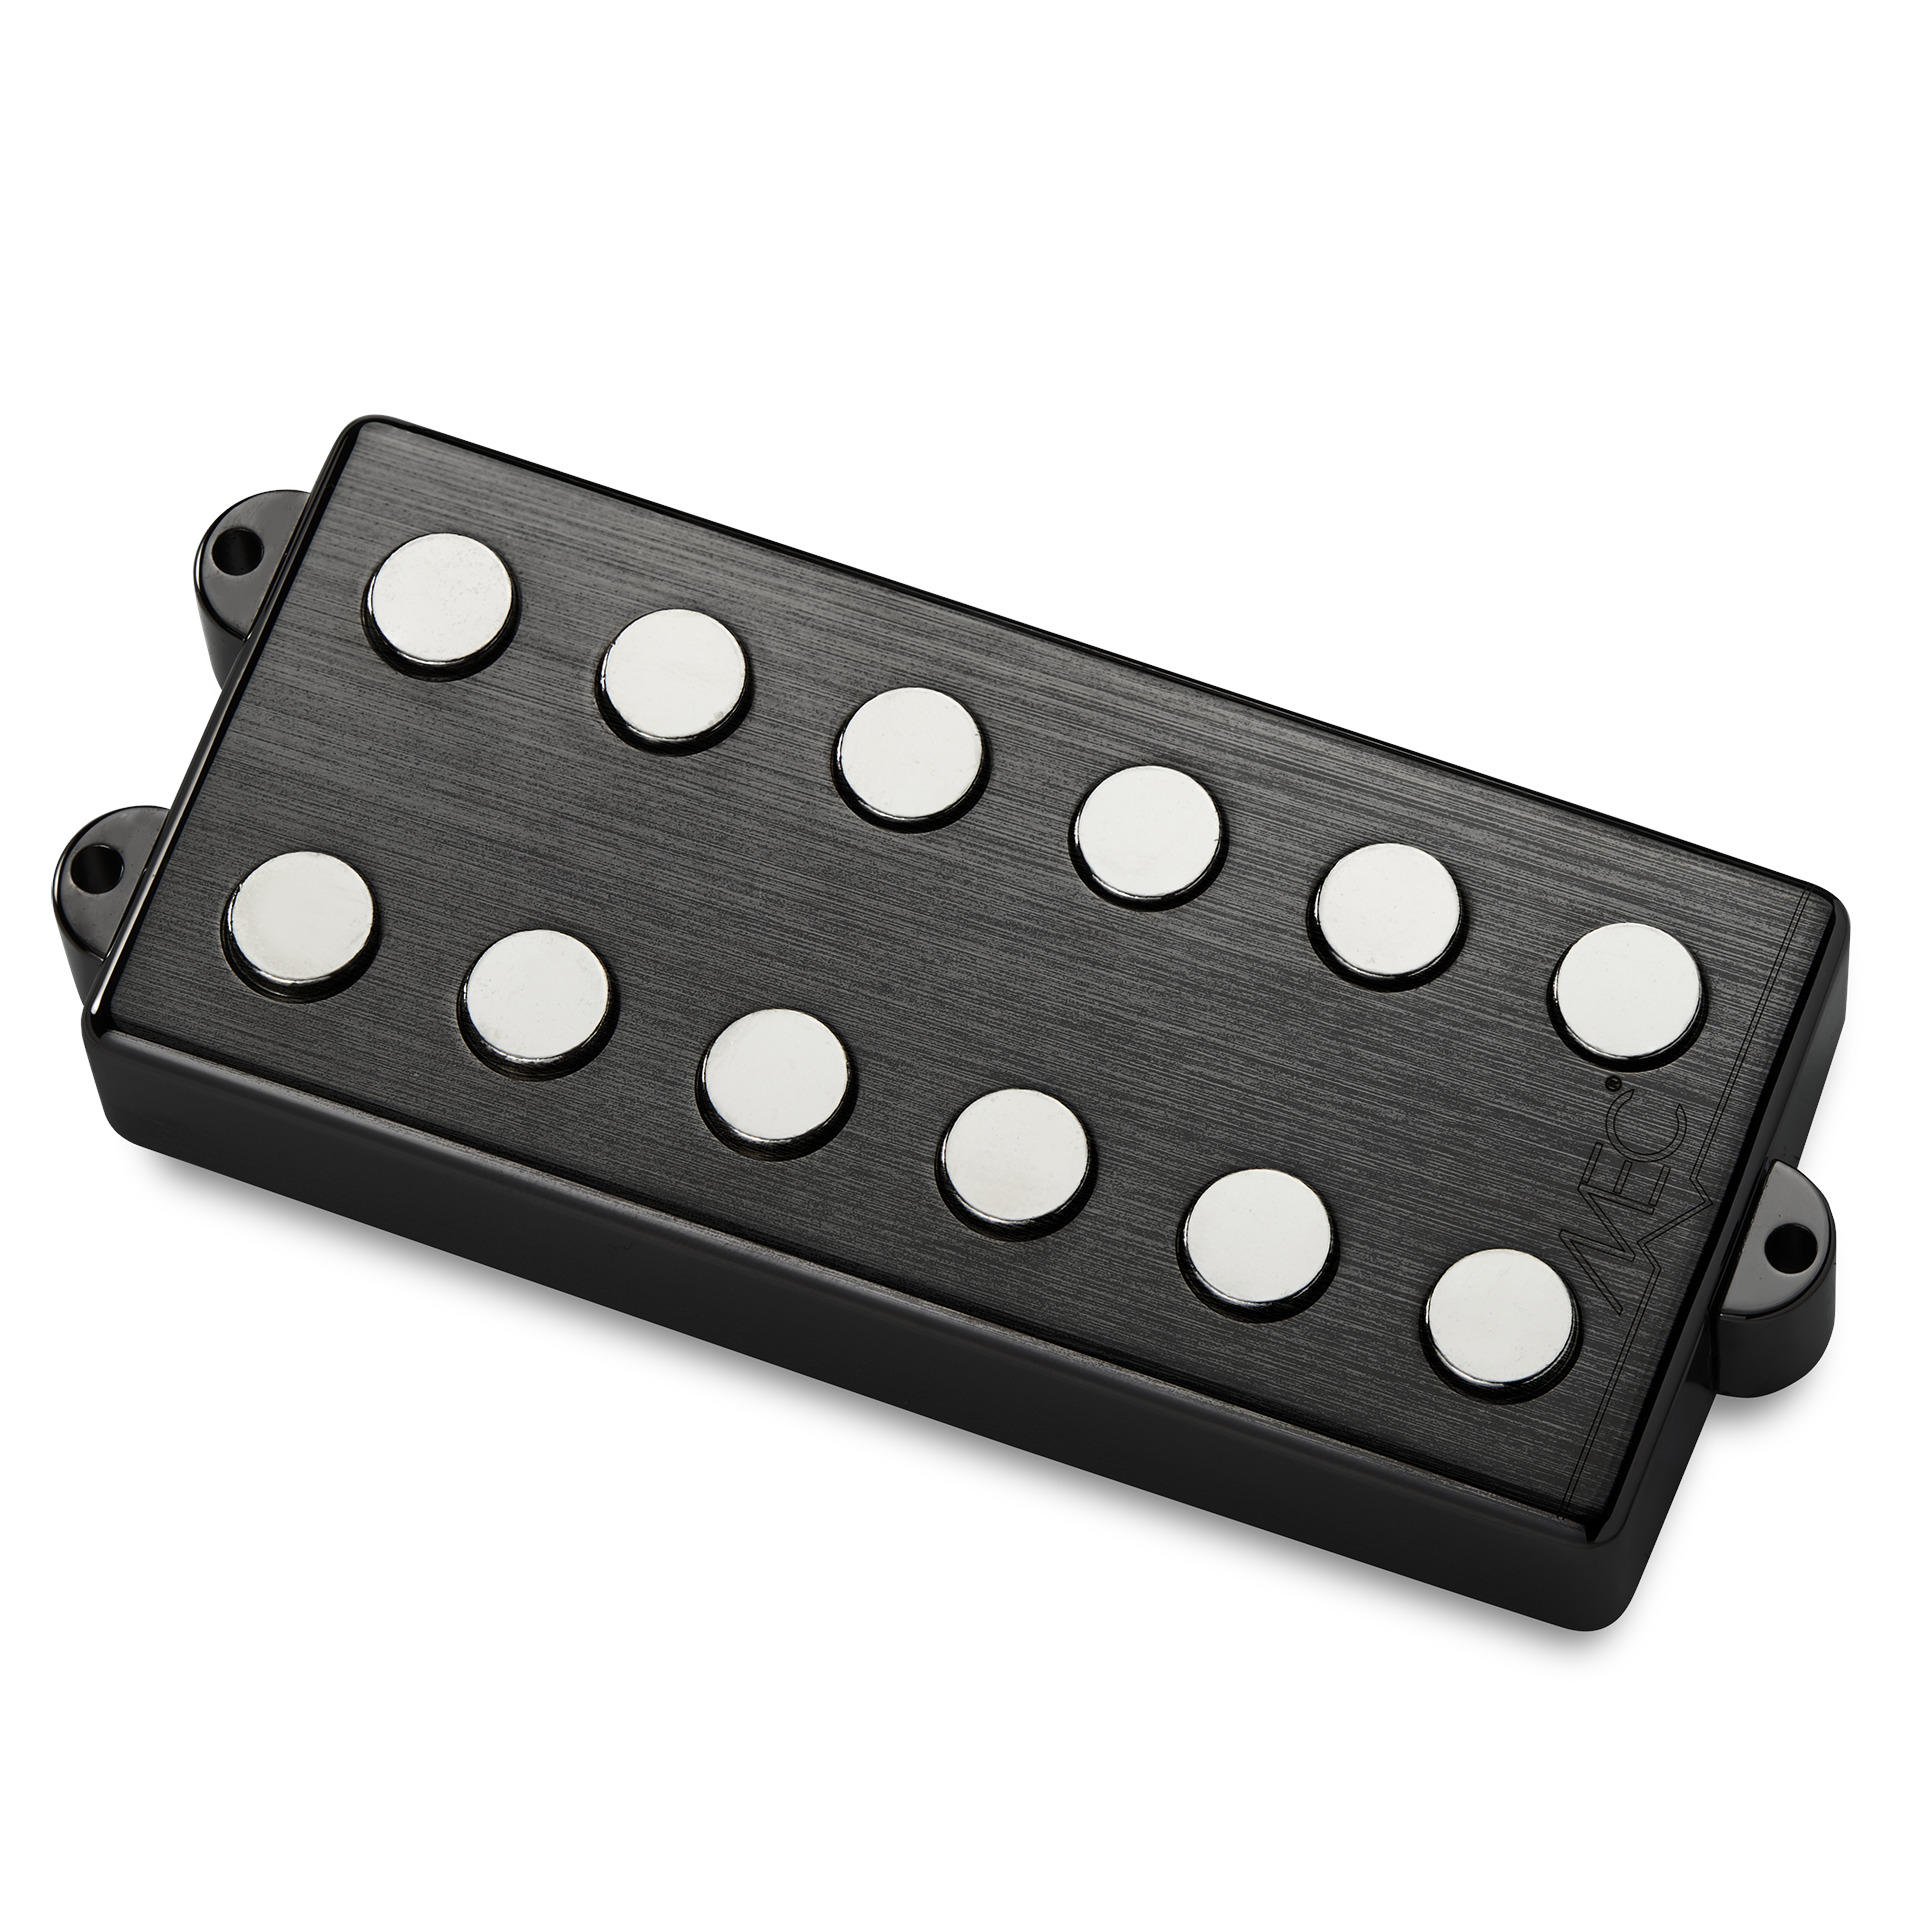 MEC Passive MM-Style Bass Pickup, Metal Cover, 6-String, Neck - Brushed Black Chrome